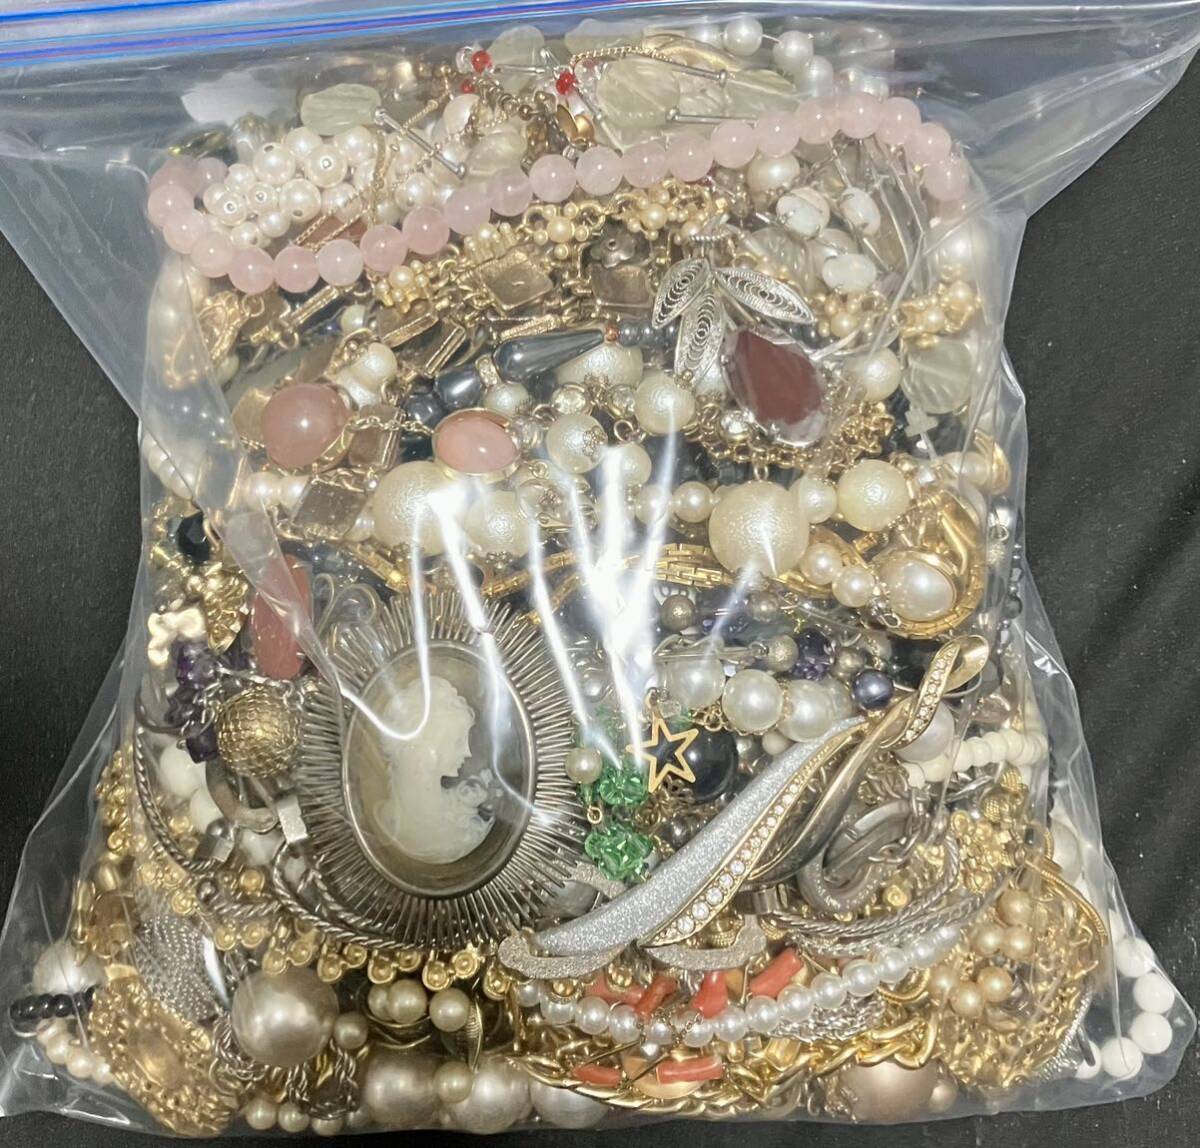 [1 jpy start ] accessory large amount summarize * approximately 10kg K18 Silver 925 necklace brooch earrings etc. * pearl natural stone gilding other *416-1